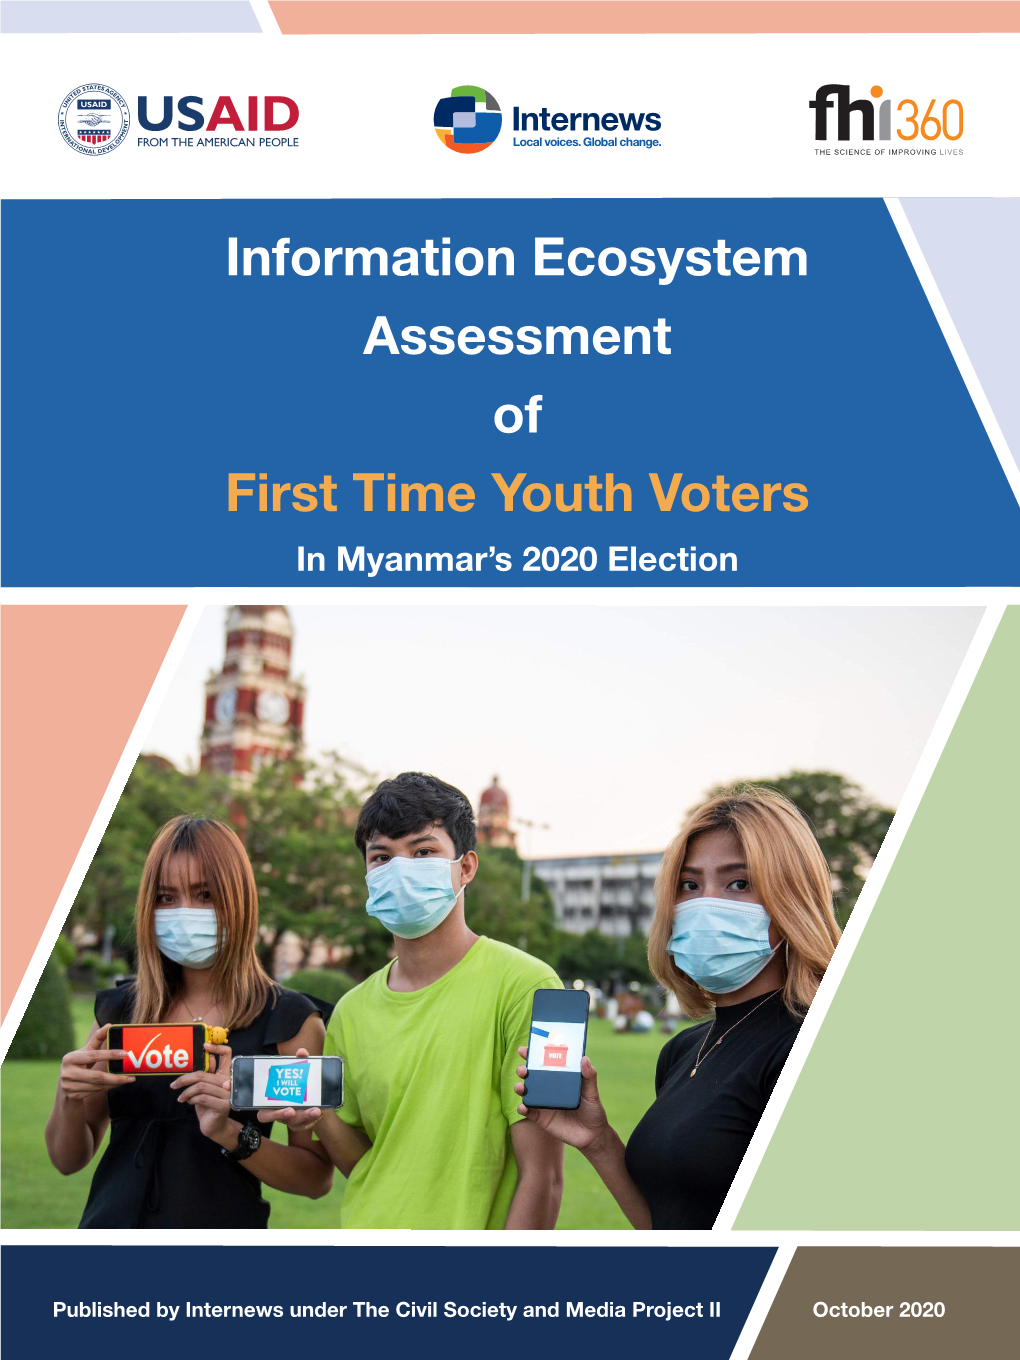 Information Ecosystem Assessment of First Time Youth Voters in Myanmar’S 2020 Election